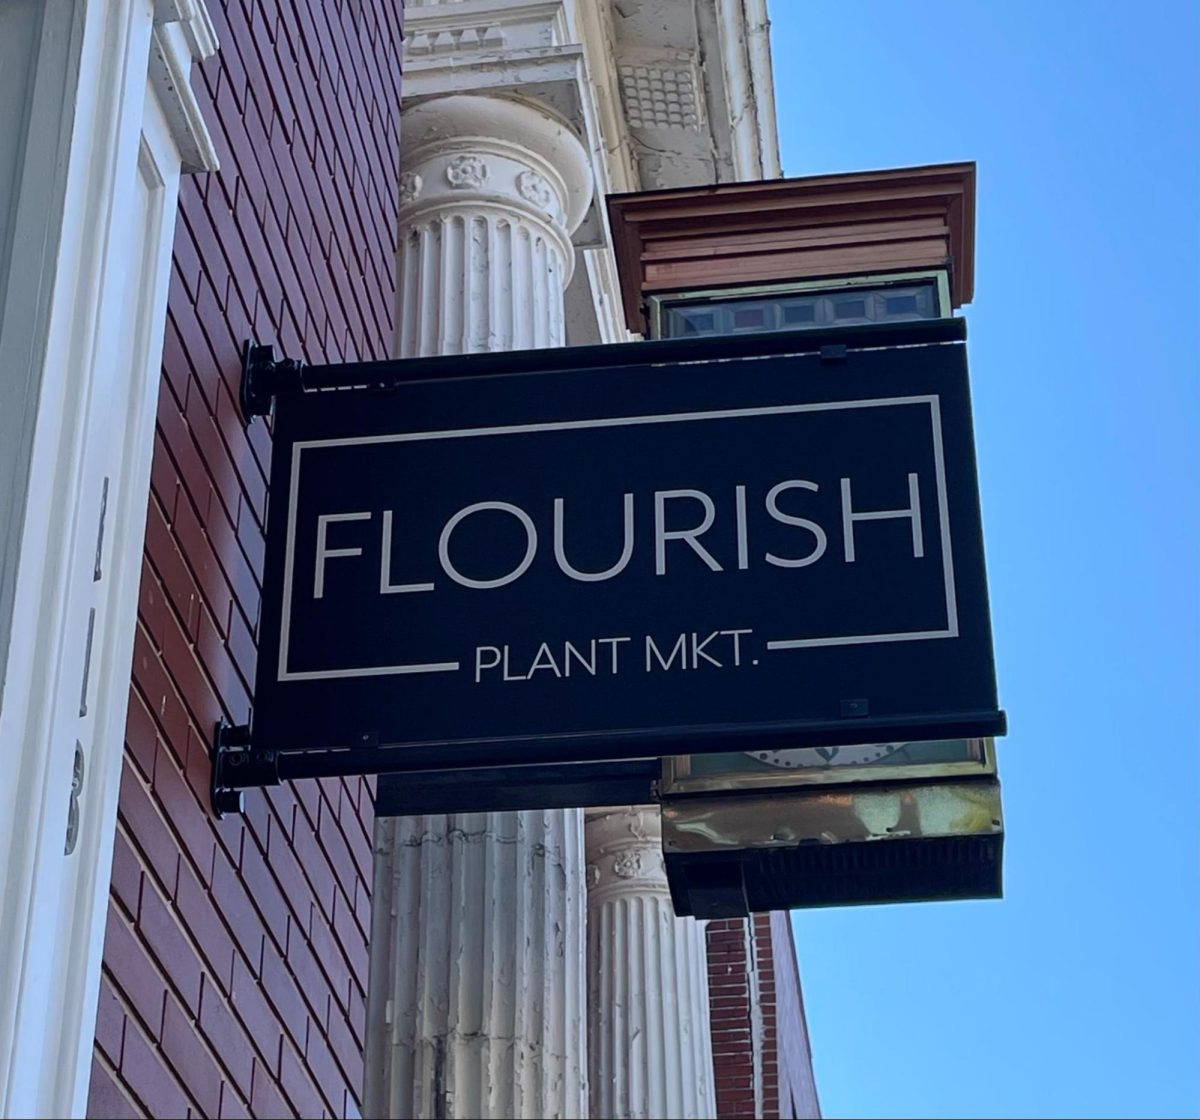 Flourish Plant Markets is located at 113 South Water St.